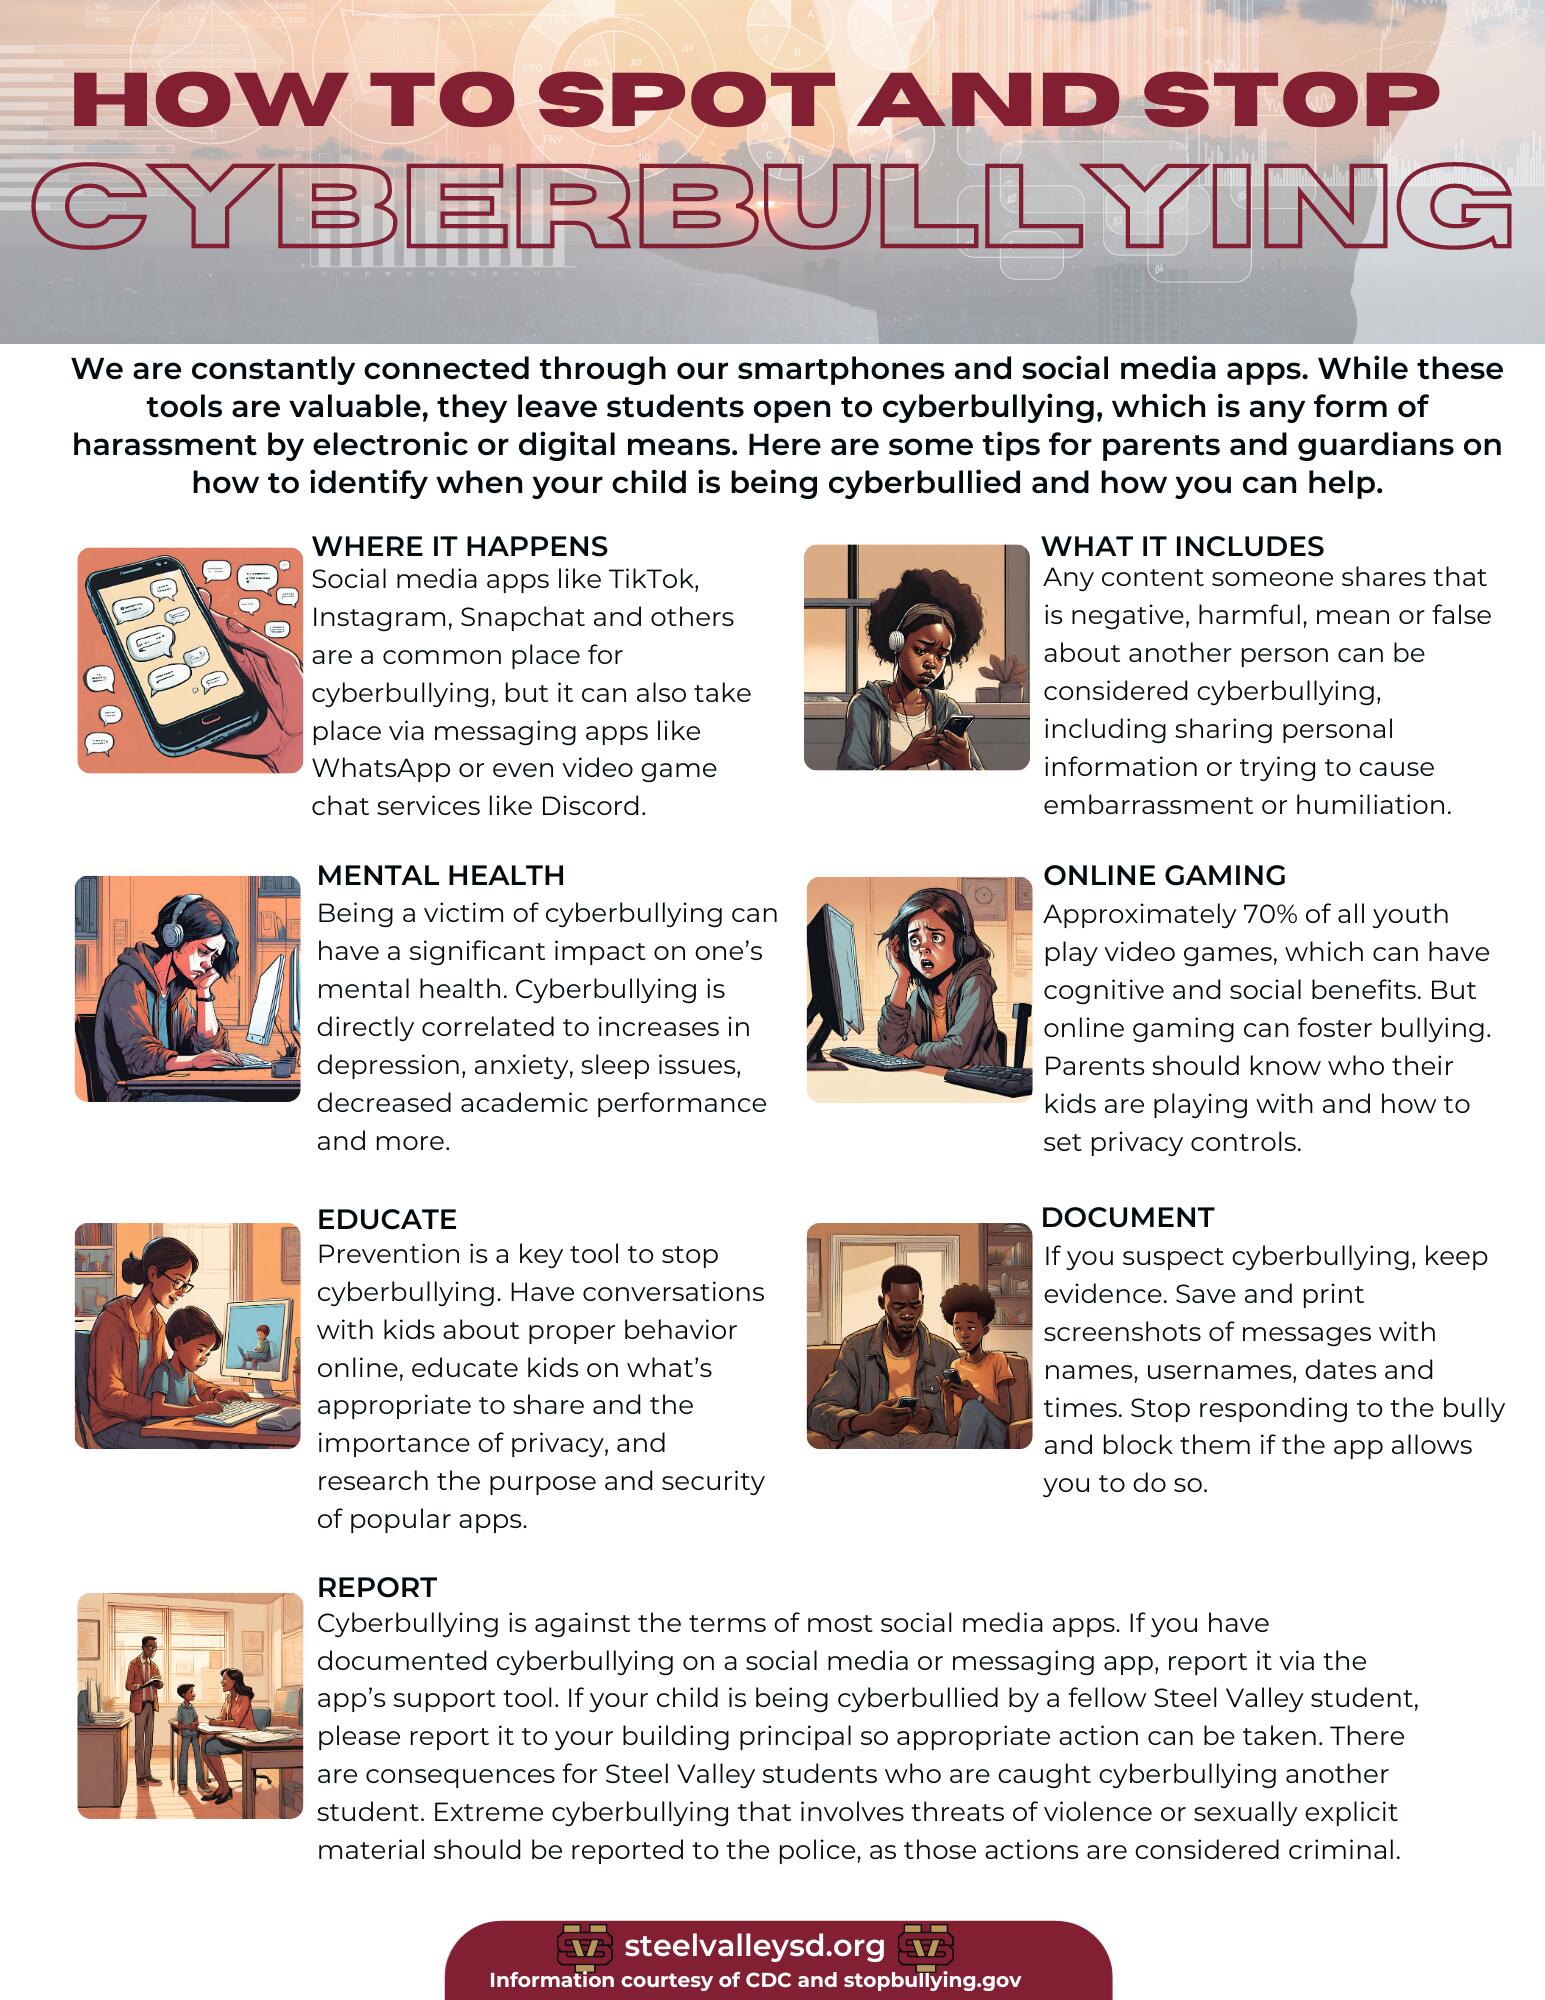 An infographic sharing important information about Cyberbullying